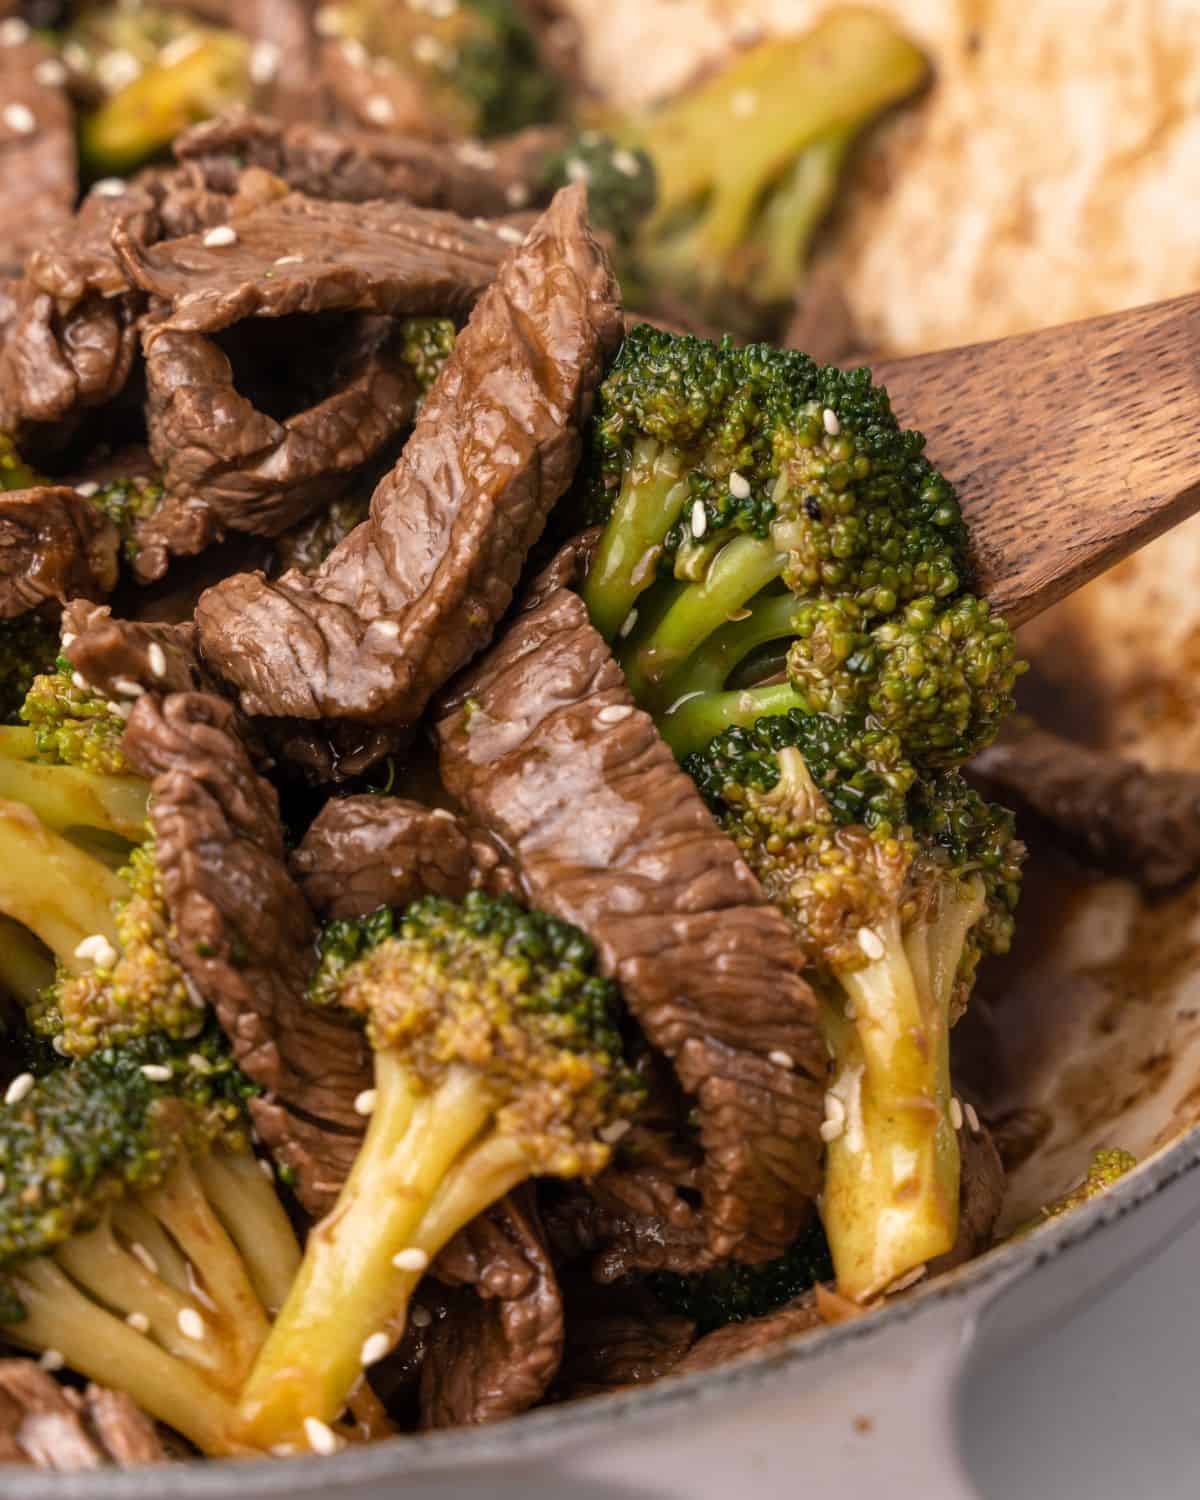 beef and broccoli close up picture.